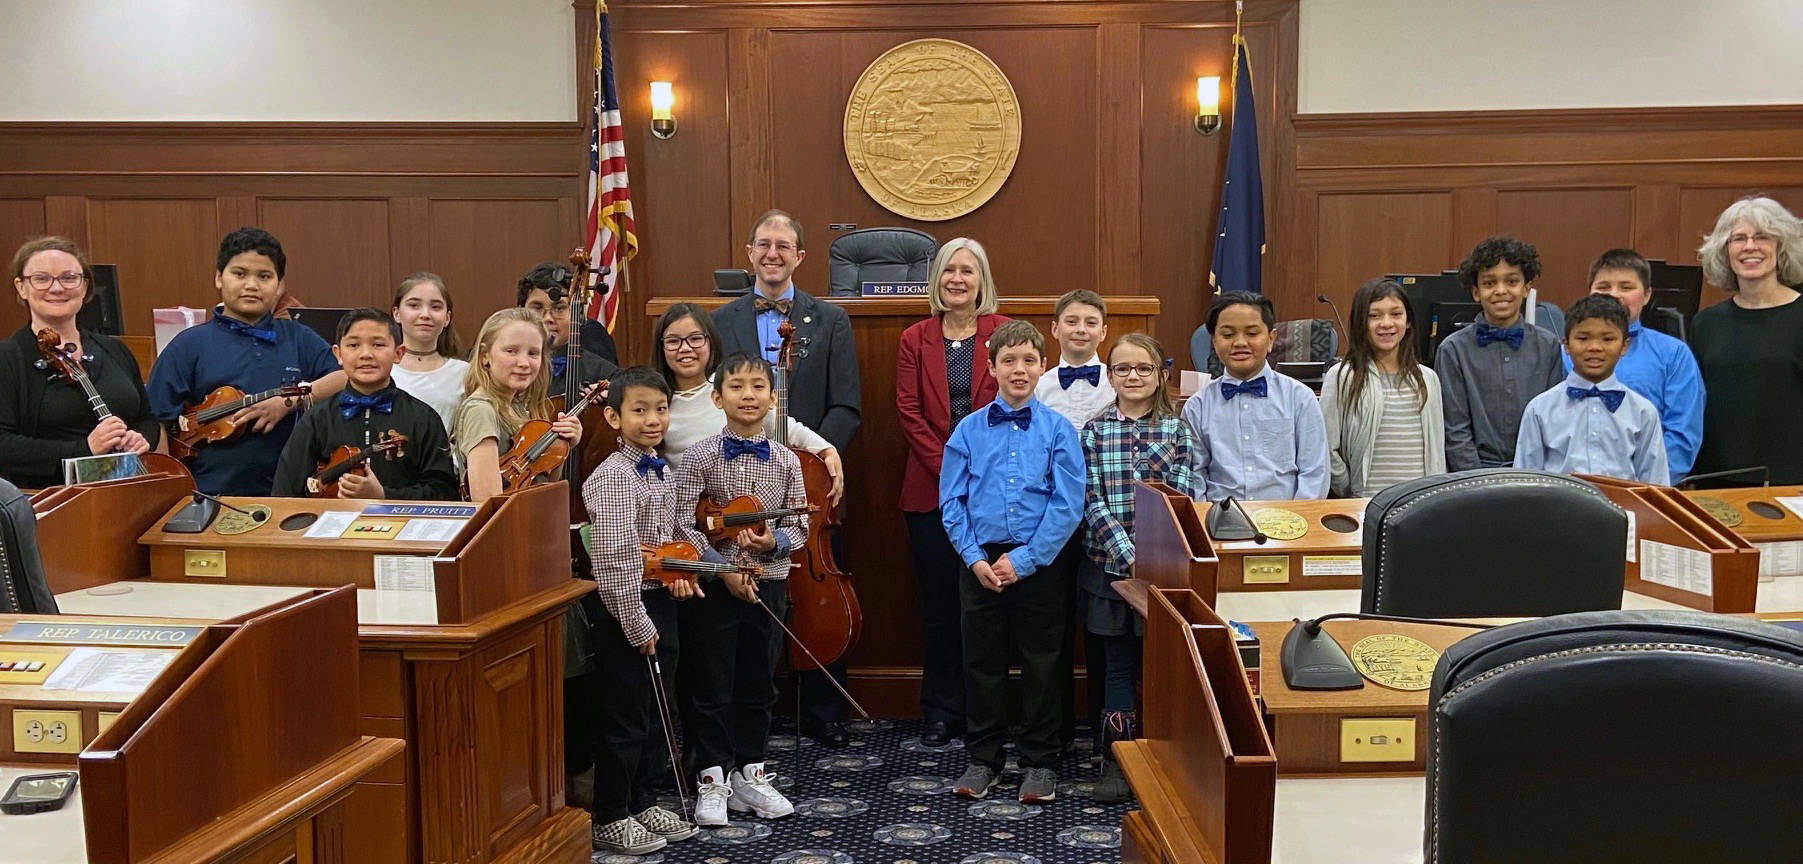 Fourth- and fifth-grade students stand in Alaska State Capitol after performing the sate song, “Alaska’s Flag,” on the first day of the legislative session. Glacier Valley Elementary School Sít’ Eetí Shaanáx music teacher Lorrie Heagy stands on the far right side of the line. Sen. Jesse Kiehl and Rep. Andi Story, both Juneau Democrats, stand in the middle. (Courtesy Photo | Lorrie Heagy)